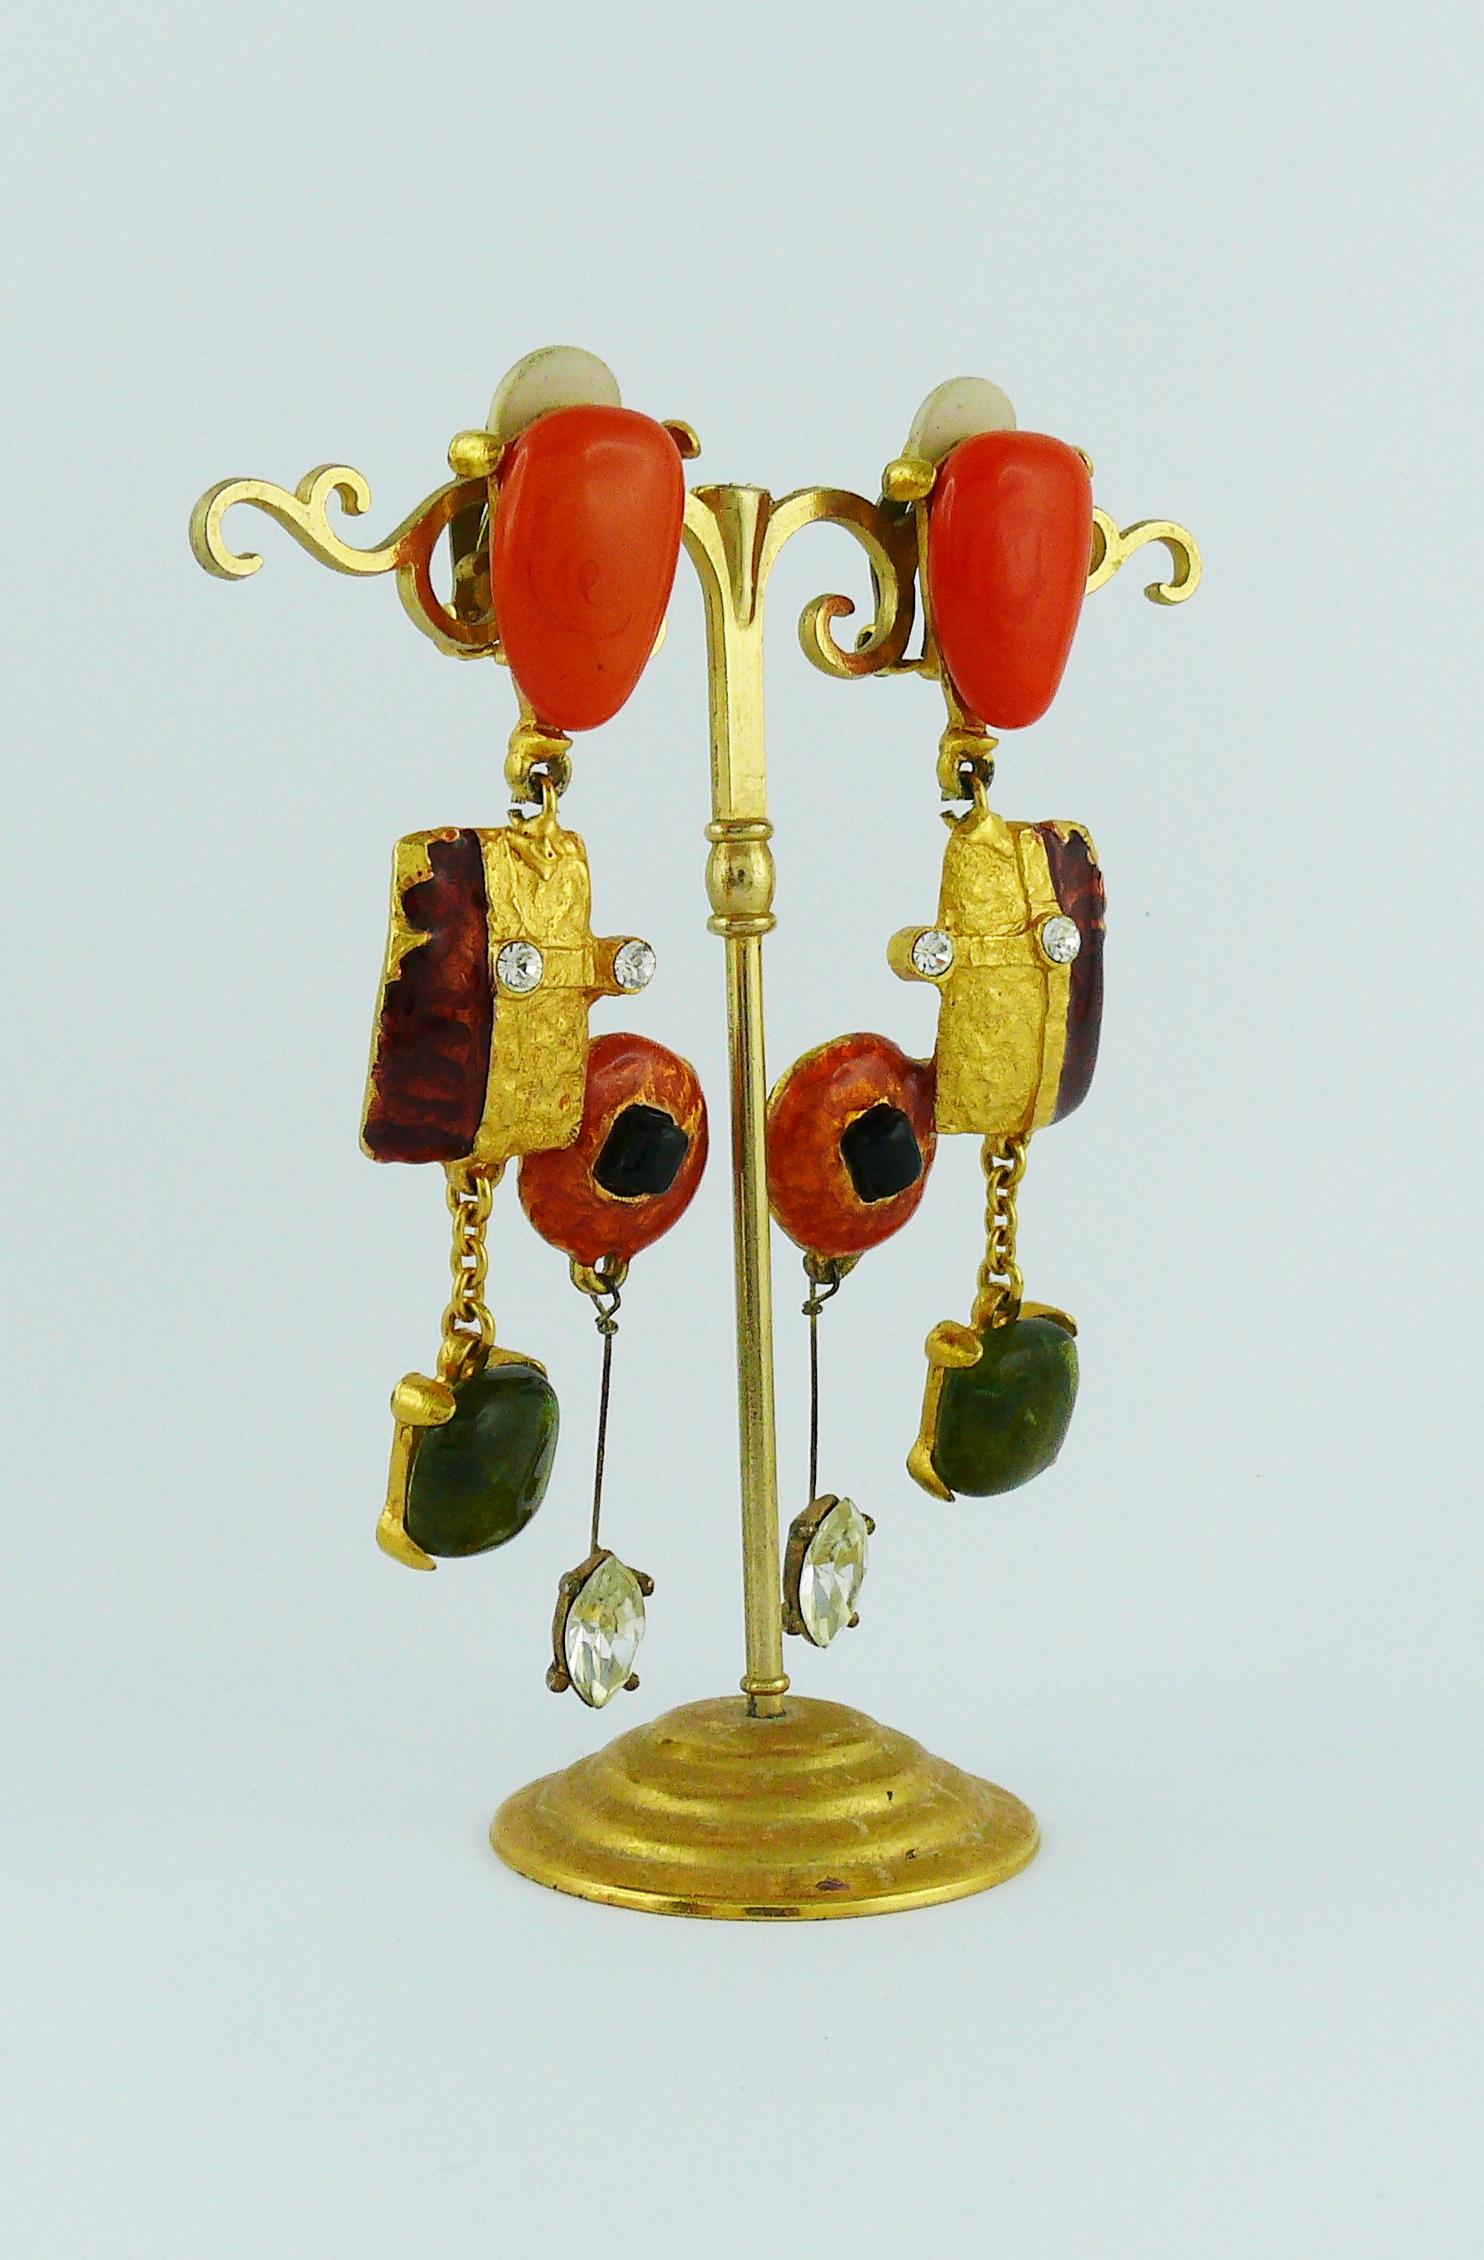 CHRISTIAN LACROIX vintage gold toned abstract dangling earrings (clip-on) featuring glass cabochons, clear crystals and enamel.

Marked CHRISTIAN LACROIX CL Made in France.

Indicative measurements : height approx. 9 cm (3.54 inches) / max. width